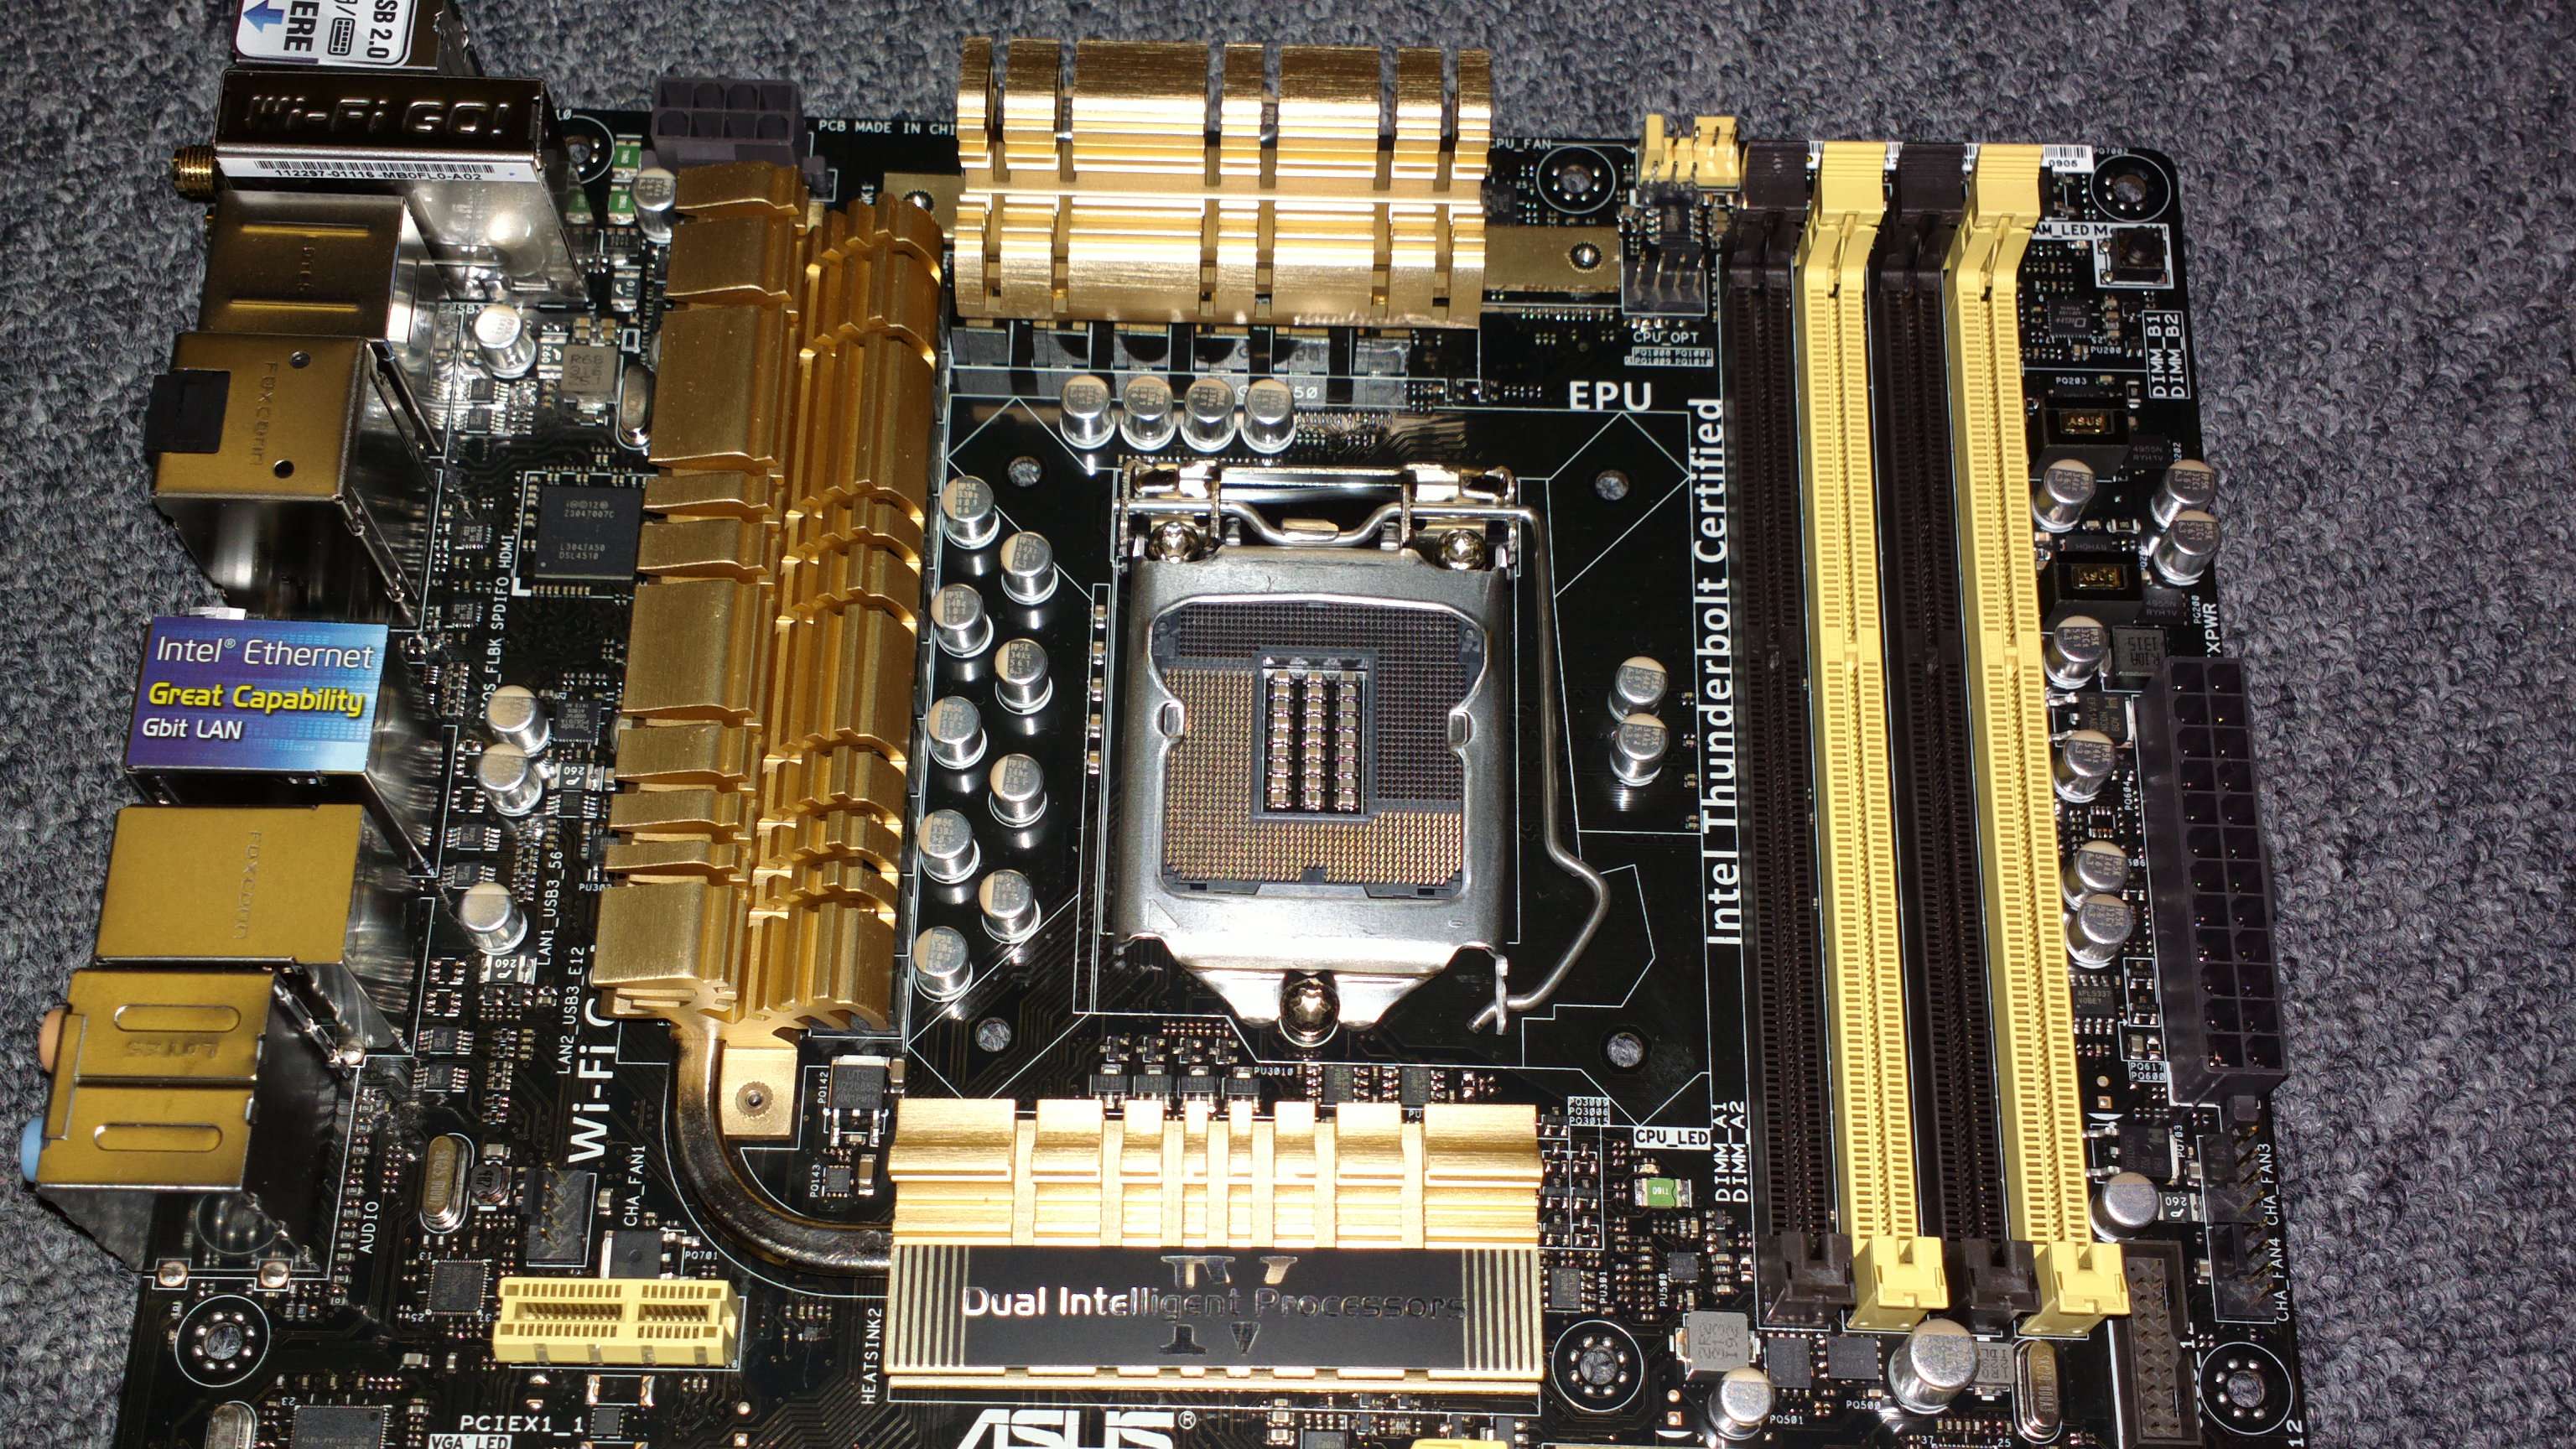 asus z87 pro mobo